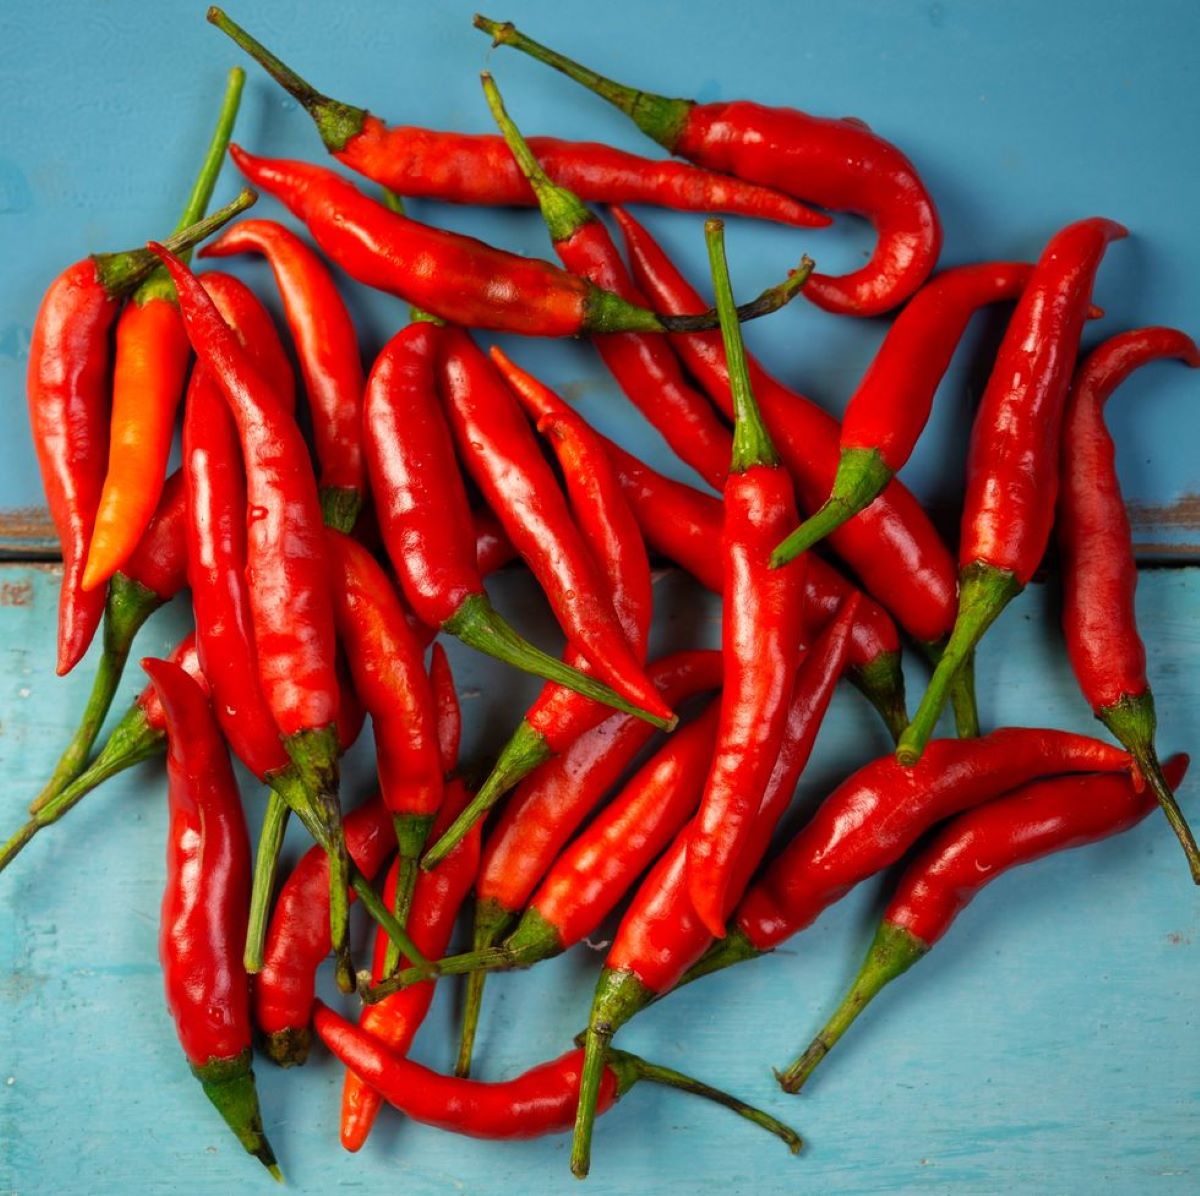 How To Store Hot Peppers